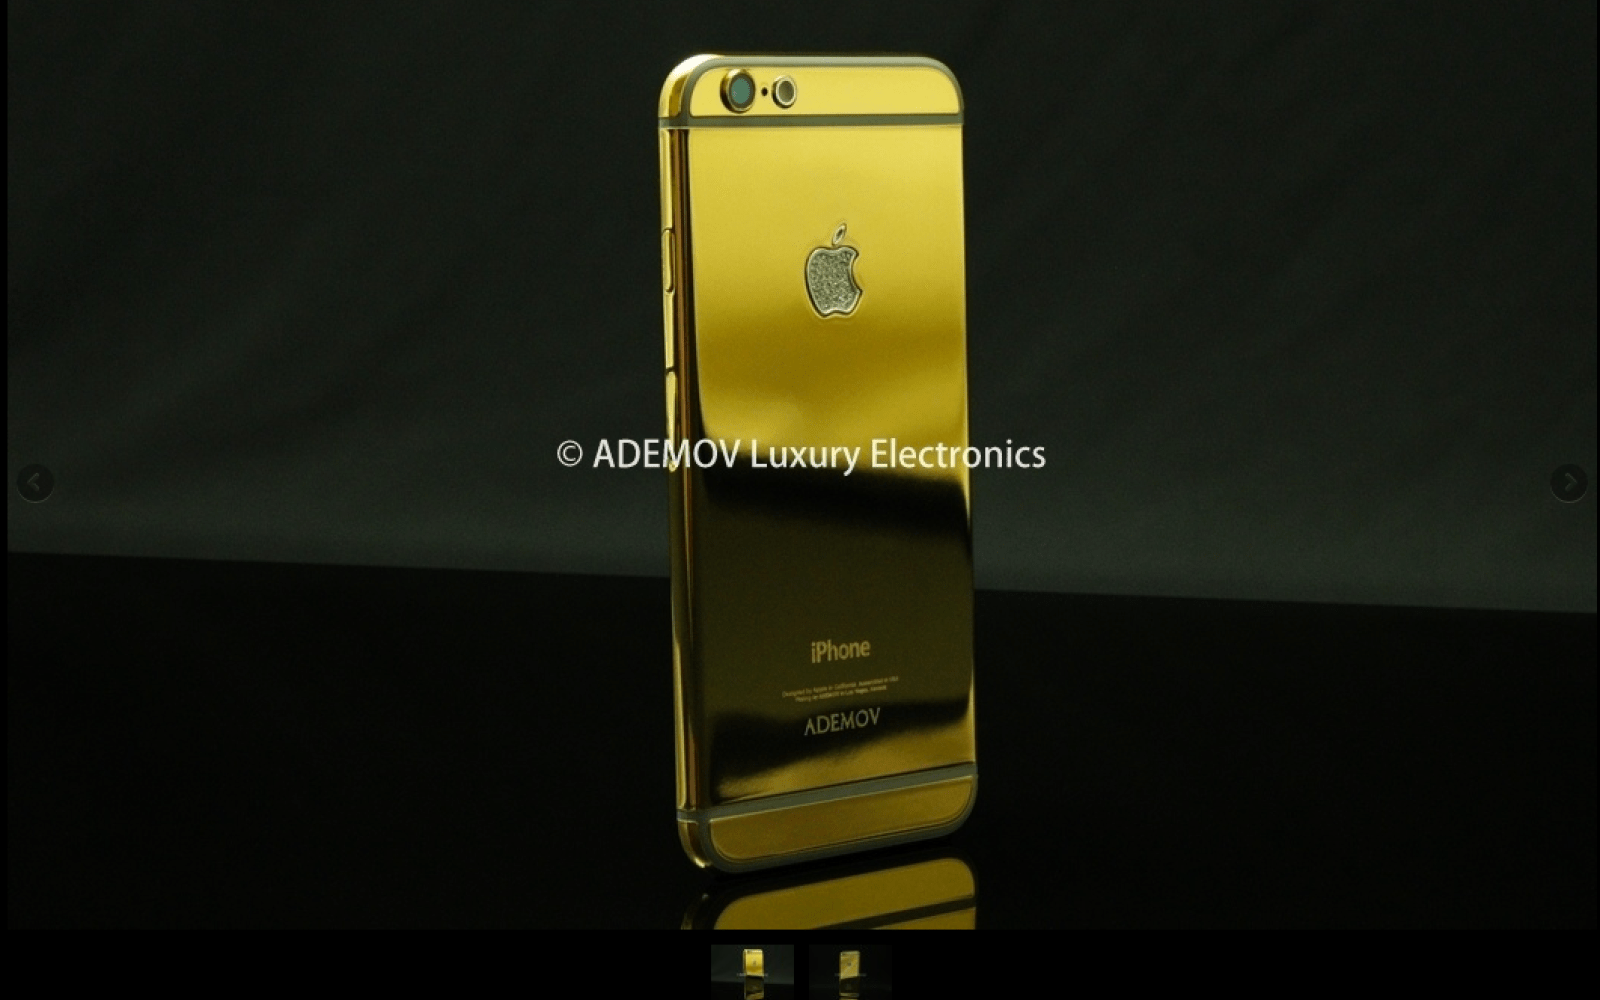 Gold and Diamond Apple Logo - Prove you're rich with this 24KT gold iPhone 6 with diamond Apple ...